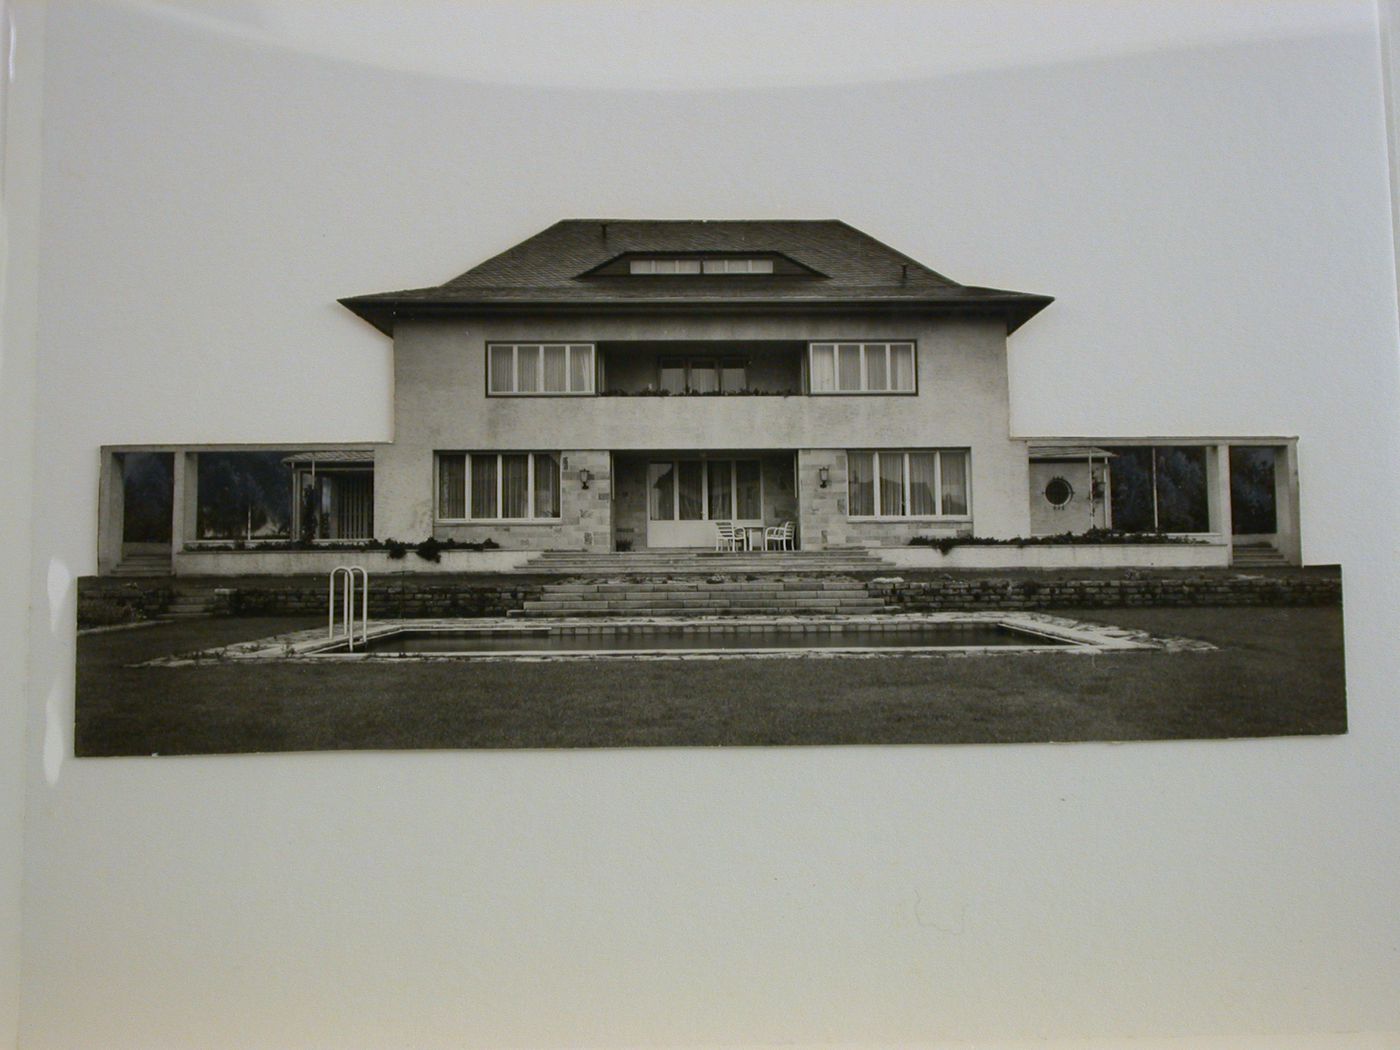 View of the rear façade of Haus H.B., Minden, Germany